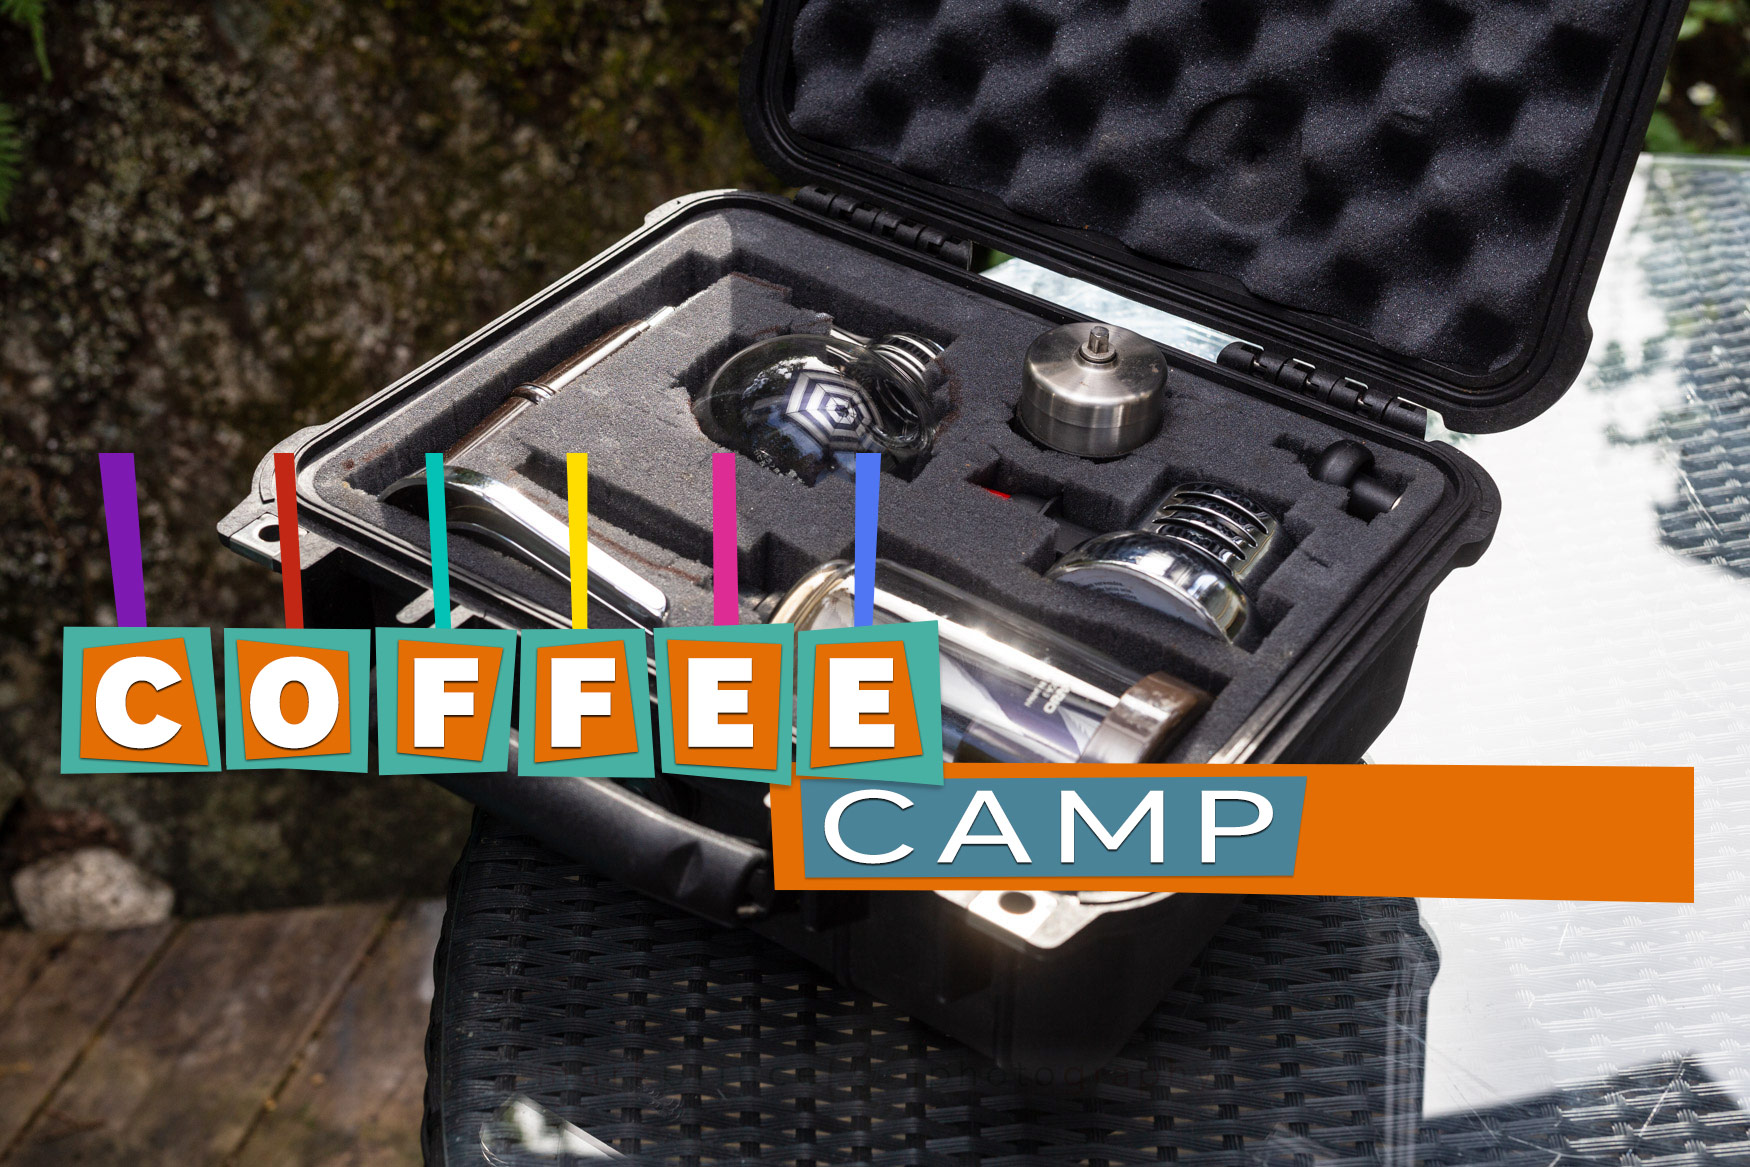 The Best Camp Coffee Makers of 2021